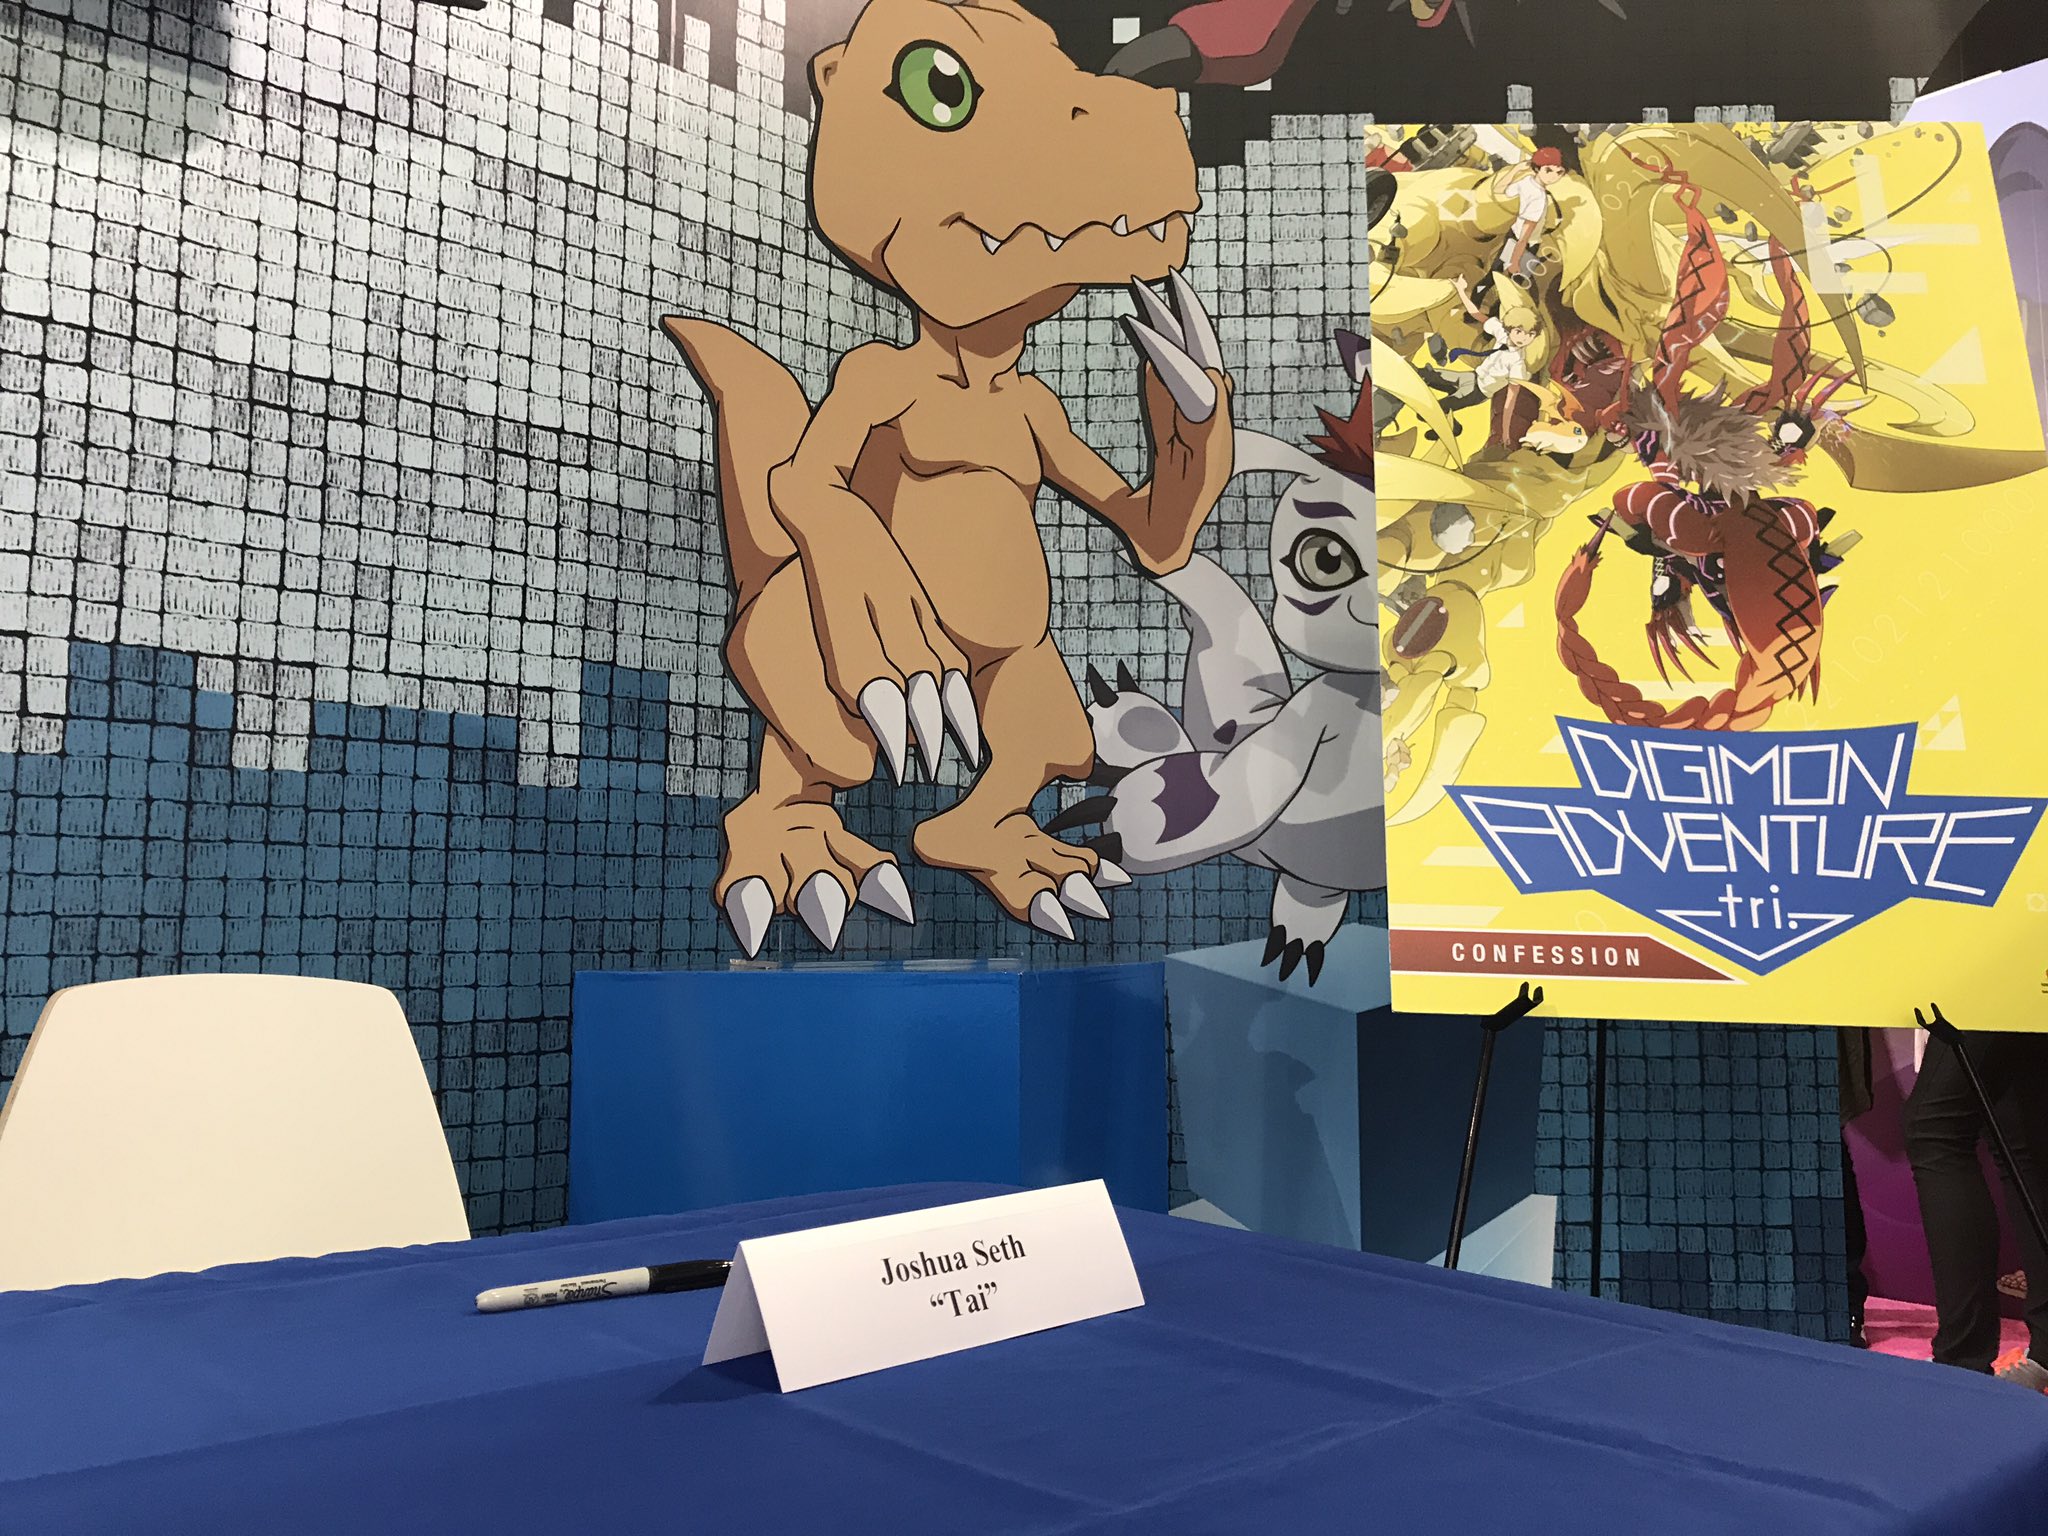 Digimon at Anime Expo 2017  With the Will // Digimon Forums